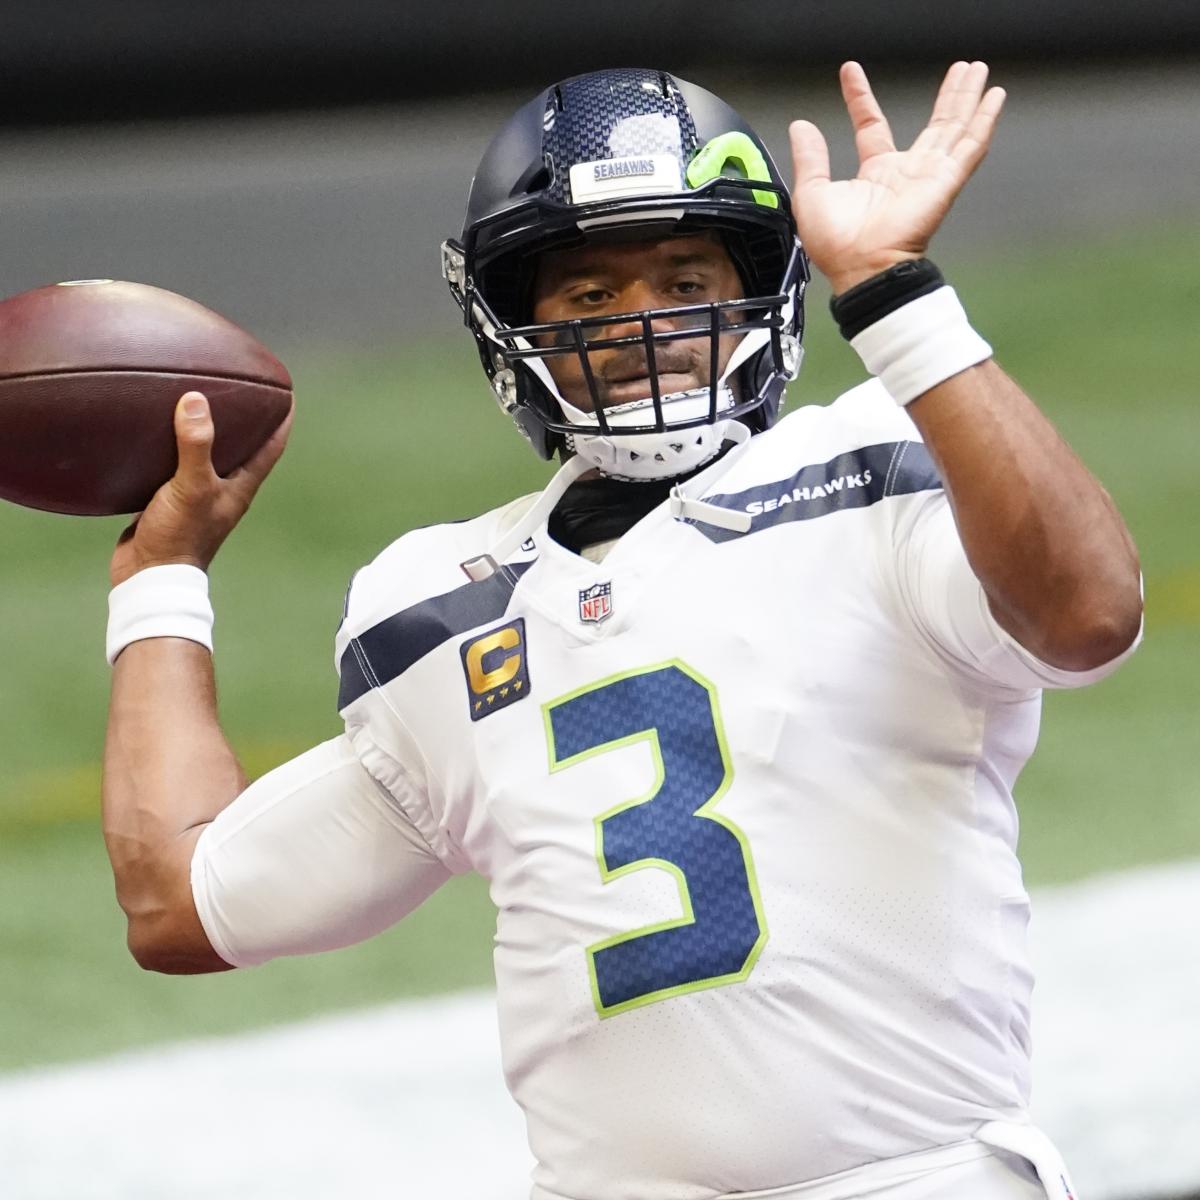 Russell Wilson Turns into 2nd NFL Player with 30K Passing Yards, 4K Rushing Yards